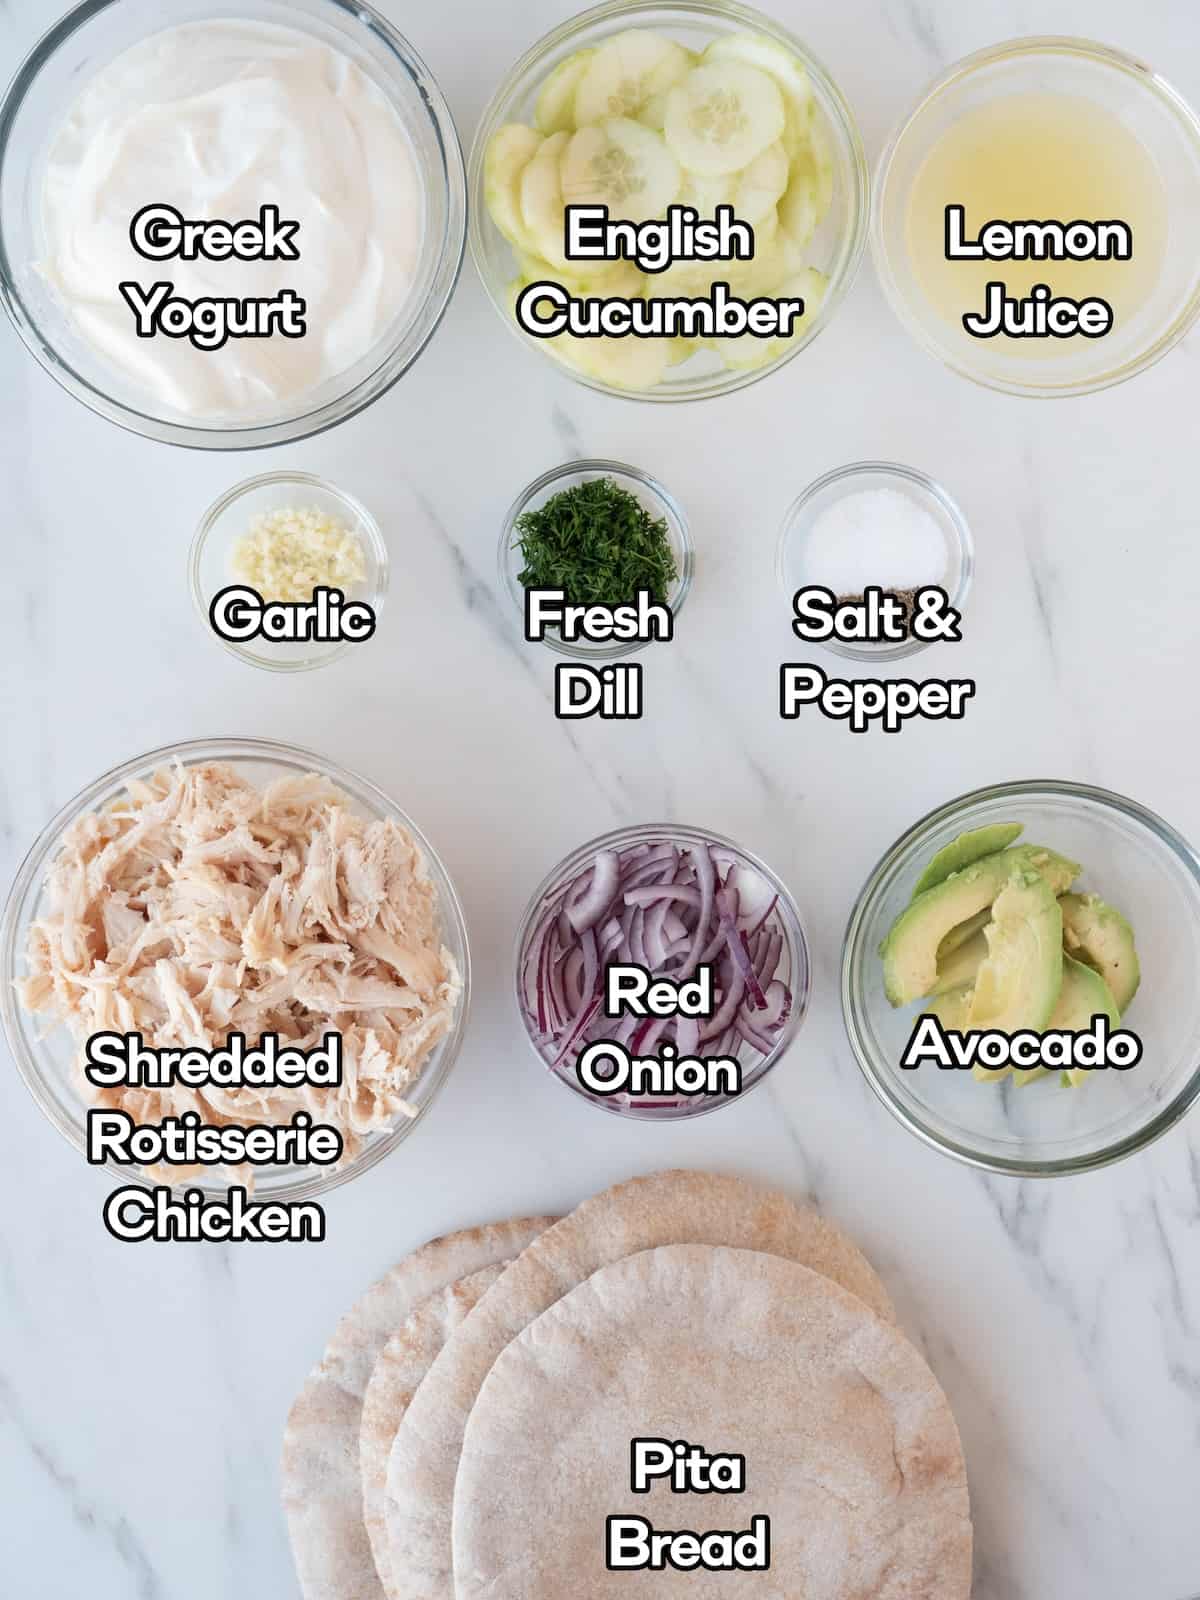 Mise-en-place of all the ingredients to make Greek Chicken Stuffed Pitas